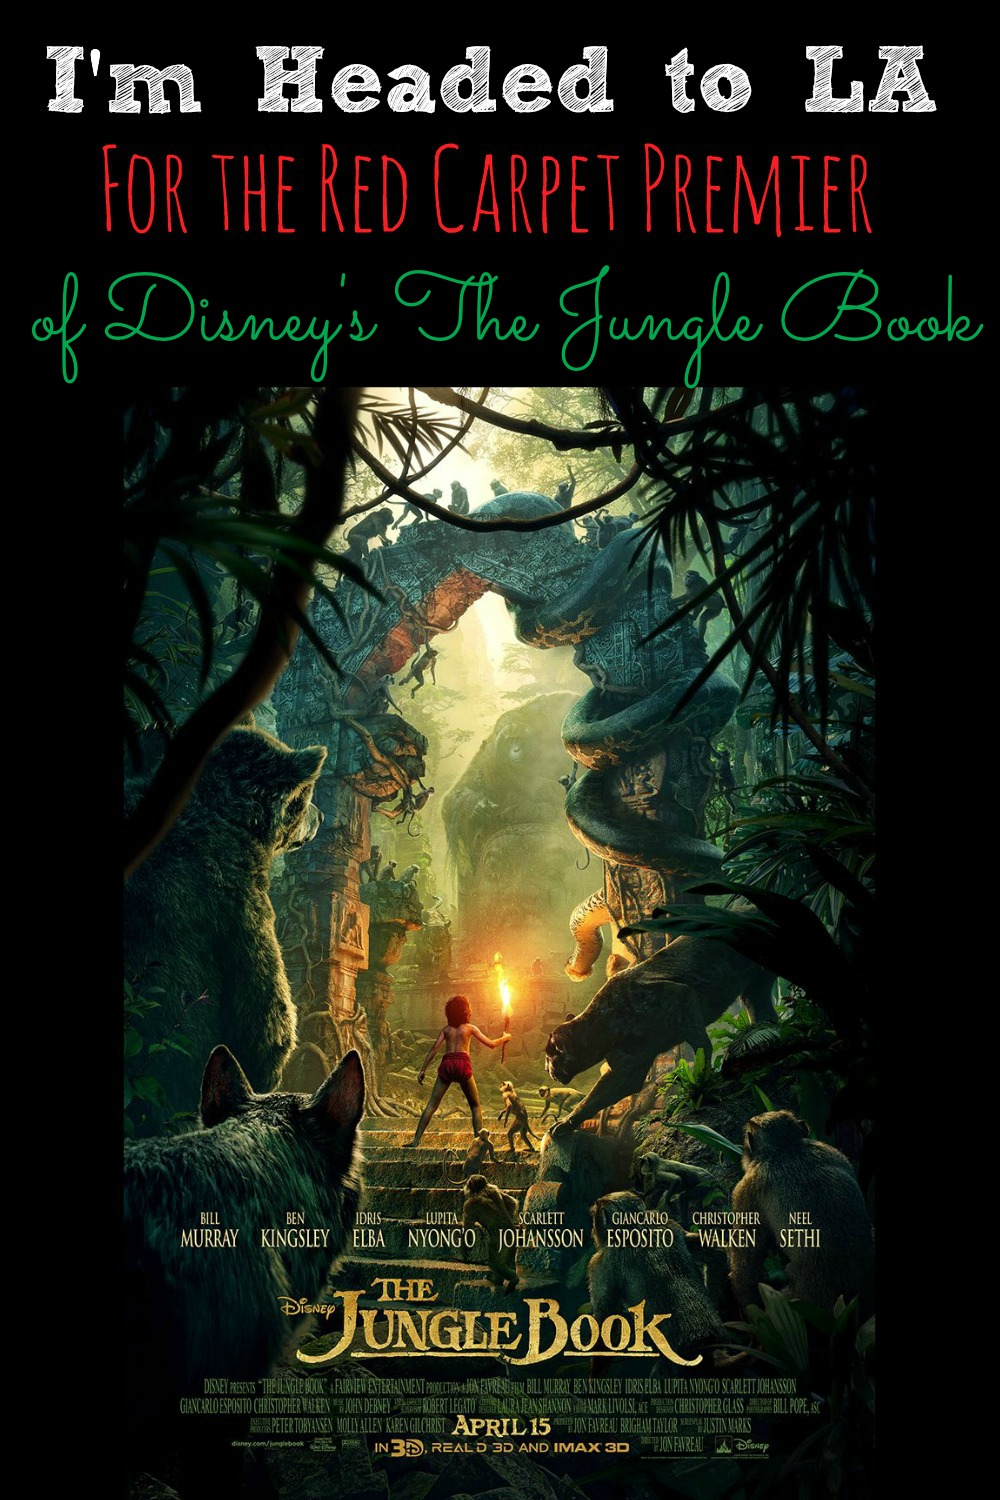 I'm Headed To LA for the Red Carpet Premier of Disney's The Jungle Book